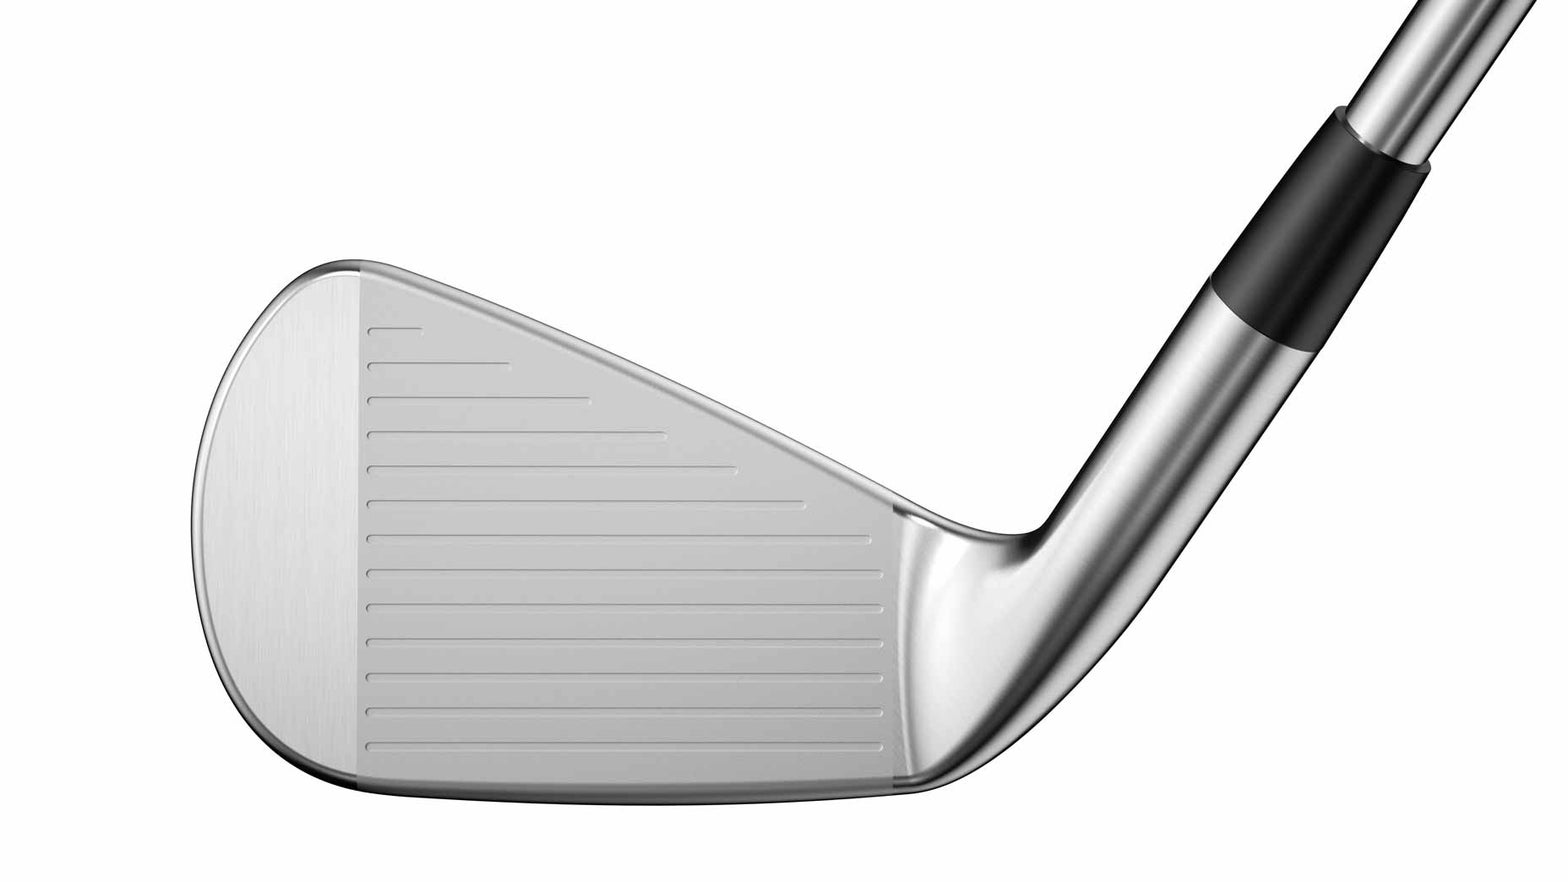 Are you ready for blade irons? Here's how to find out